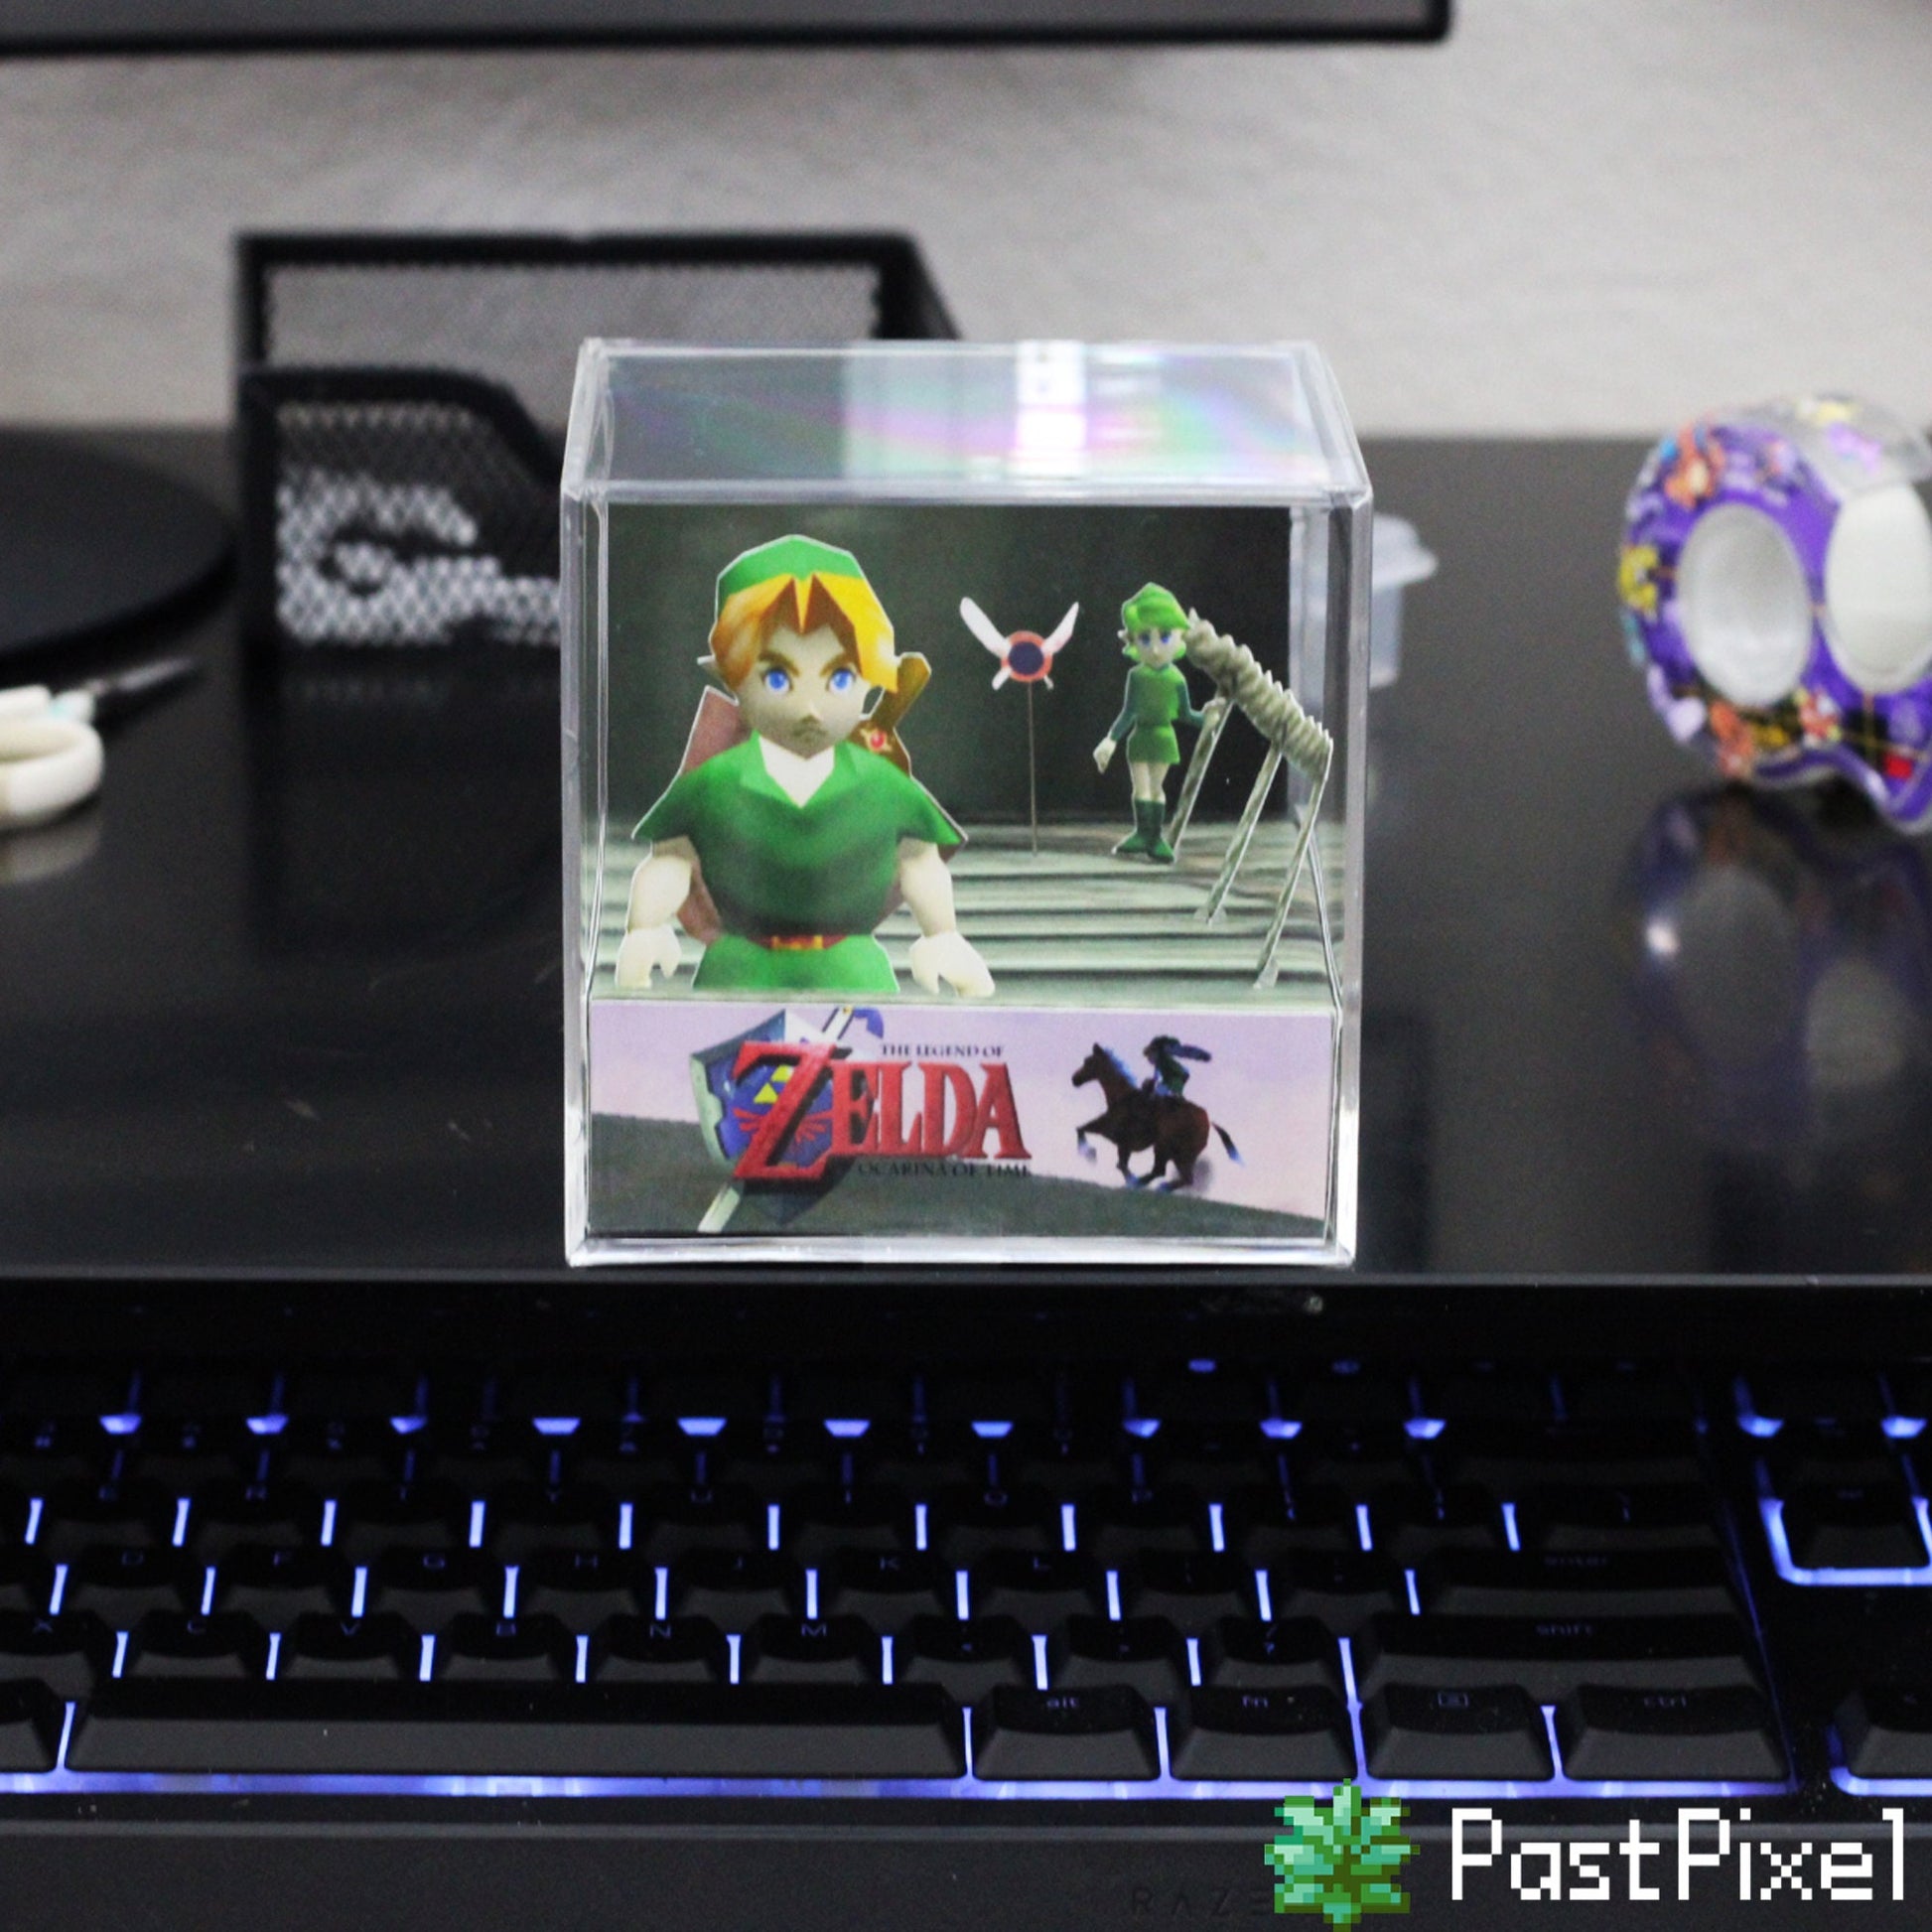 Zelda Ocarina of Time Cube Diorama 3D Videogame Gift for 